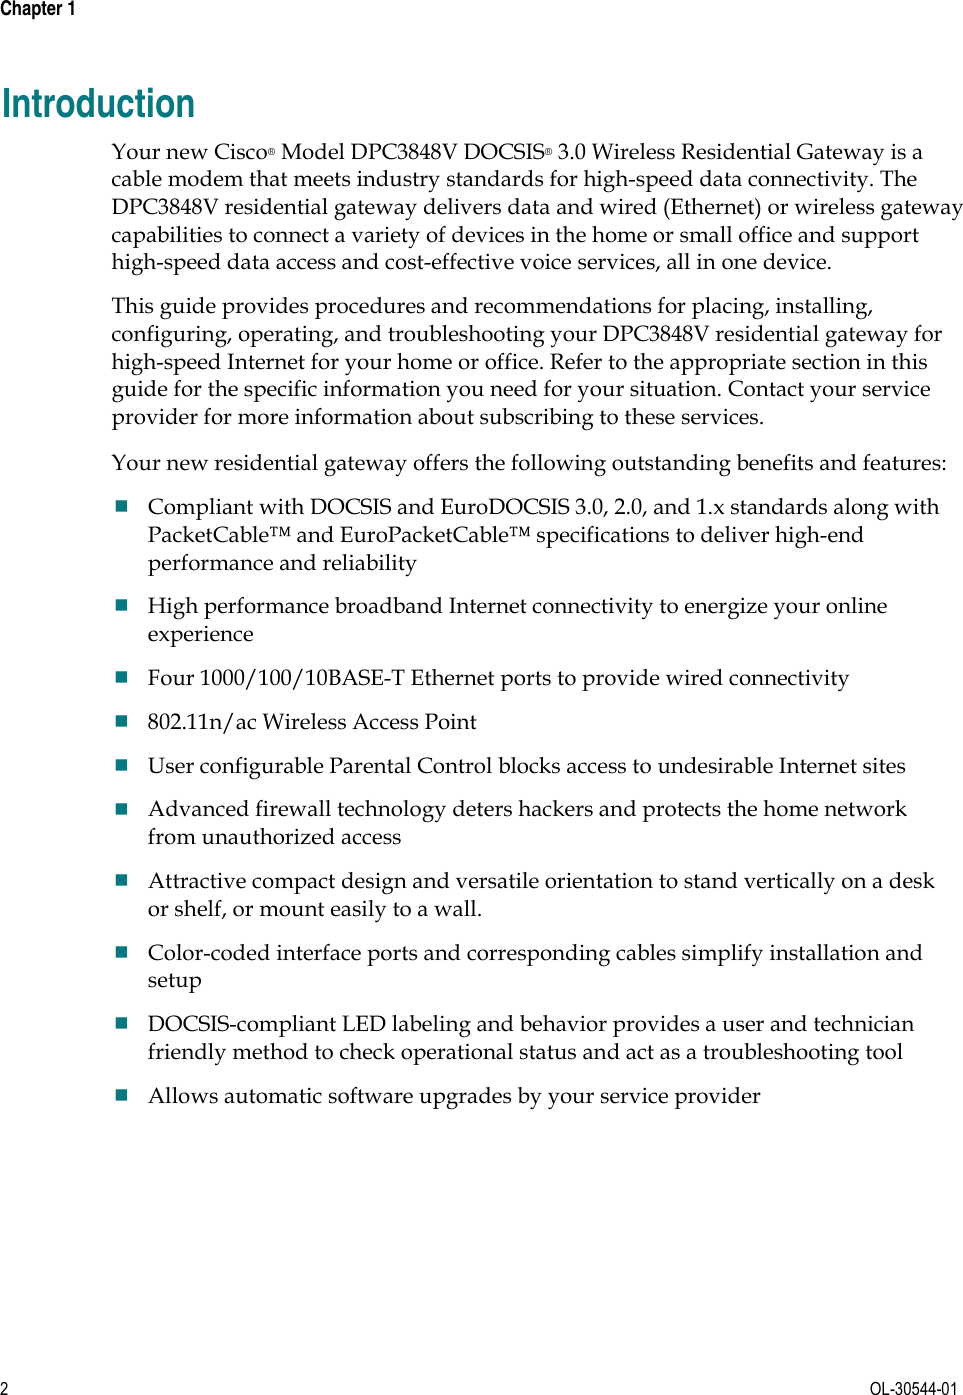  Chapter 1        2  OL-30544-01 Introduction Your new Cisco® Model DPC3848V DOCSIS® 3.0 Wireless Residential Gateway is a cable modem that meets industry standards for high-speed data connectivity. The DPC3848V residential gateway delivers data and wired (Ethernet) or wireless gateway capabilities to connect a variety of devices in the home or small office and support high-speed data access and cost-effective voice services, all in one device.   This guide provides procedures and recommendations for placing, installing, configuring, operating, and troubleshooting your DPC3848V residential gateway for high-speed Internet for your home or office. Refer to the appropriate section in this guide for the specific information you need for your situation. Contact your service provider for more information about subscribing to these services.  Your new residential gateway offers the following outstanding benefits and features: Compliant with DOCSIS and EuroDOCSIS 3.0, 2.0, and 1.x standards along with PacketCable™ and EuroPacketCable™ specifications to deliver high-end performance and reliability High performance broadband Internet connectivity to energize your online experience Four 1000/100/10BASE-T Ethernet ports to provide wired connectivity 802.11n/ac Wireless Access Point User configurable Parental Control blocks access to undesirable Internet sites Advanced firewall technology deters hackers and protects the home network from unauthorized access Attractive compact design and versatile orientation to stand vertically on a desk or shelf, or mount easily to a wall. Color-coded interface ports and corresponding cables simplify installation and setup DOCSIS-compliant LED labeling and behavior provides a user and technician friendly method to check operational status and act as a troubleshooting tool Allows automatic software upgrades by your service provider  